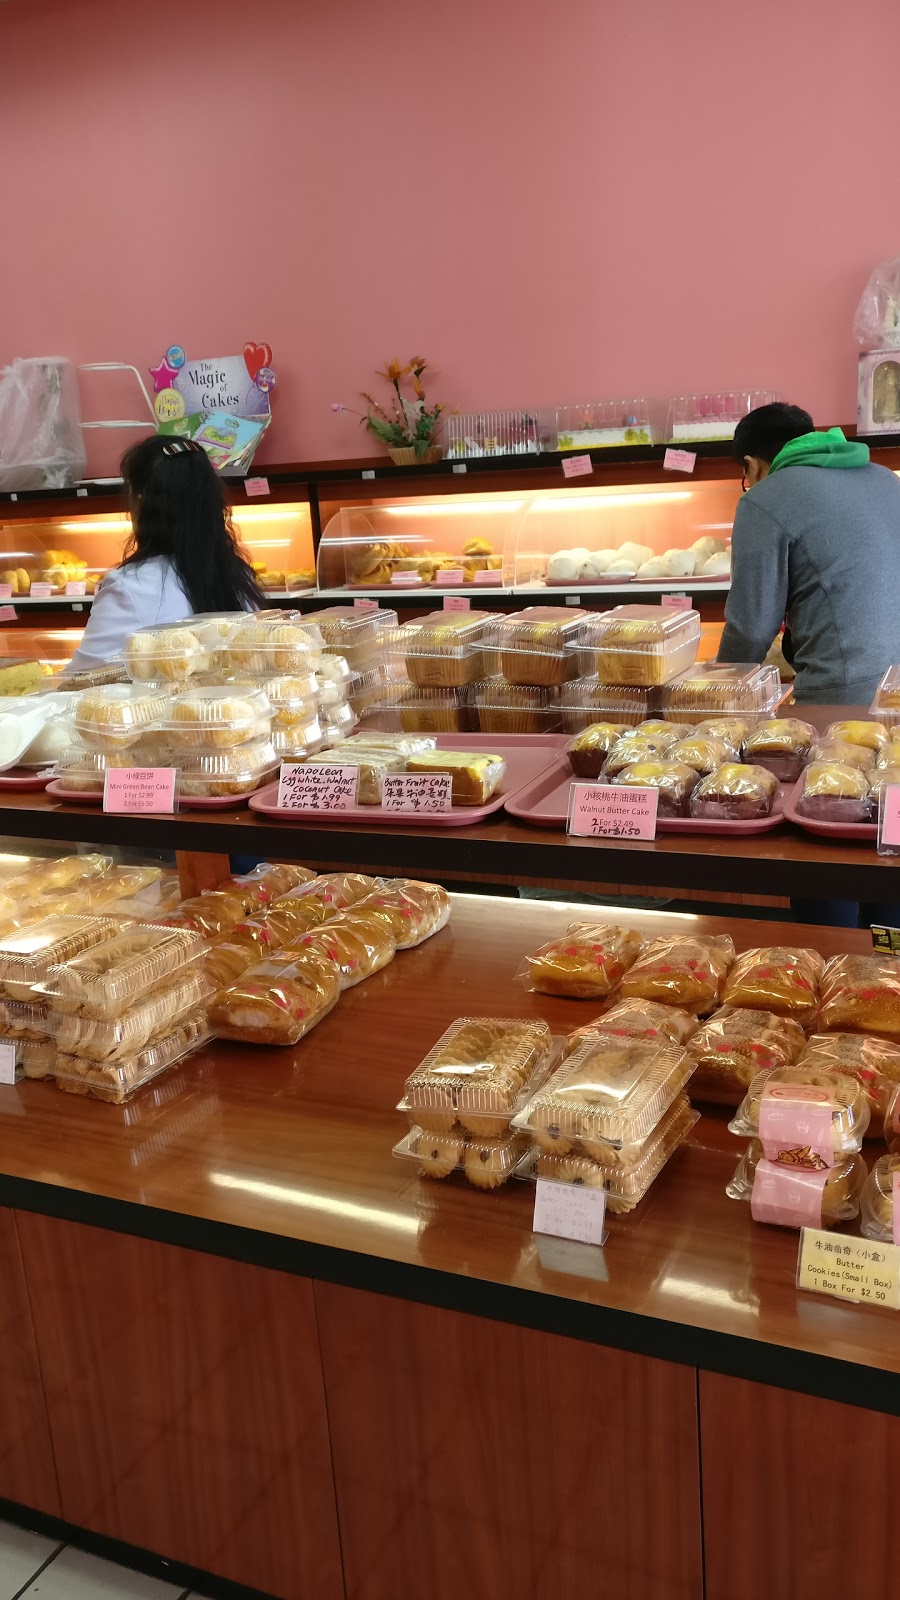 Cake House Bakery | bakery | 1965 Finch Ave W, North York, ON M3N 2V3, Canada | 4164992521 OR +1 416-499-2521